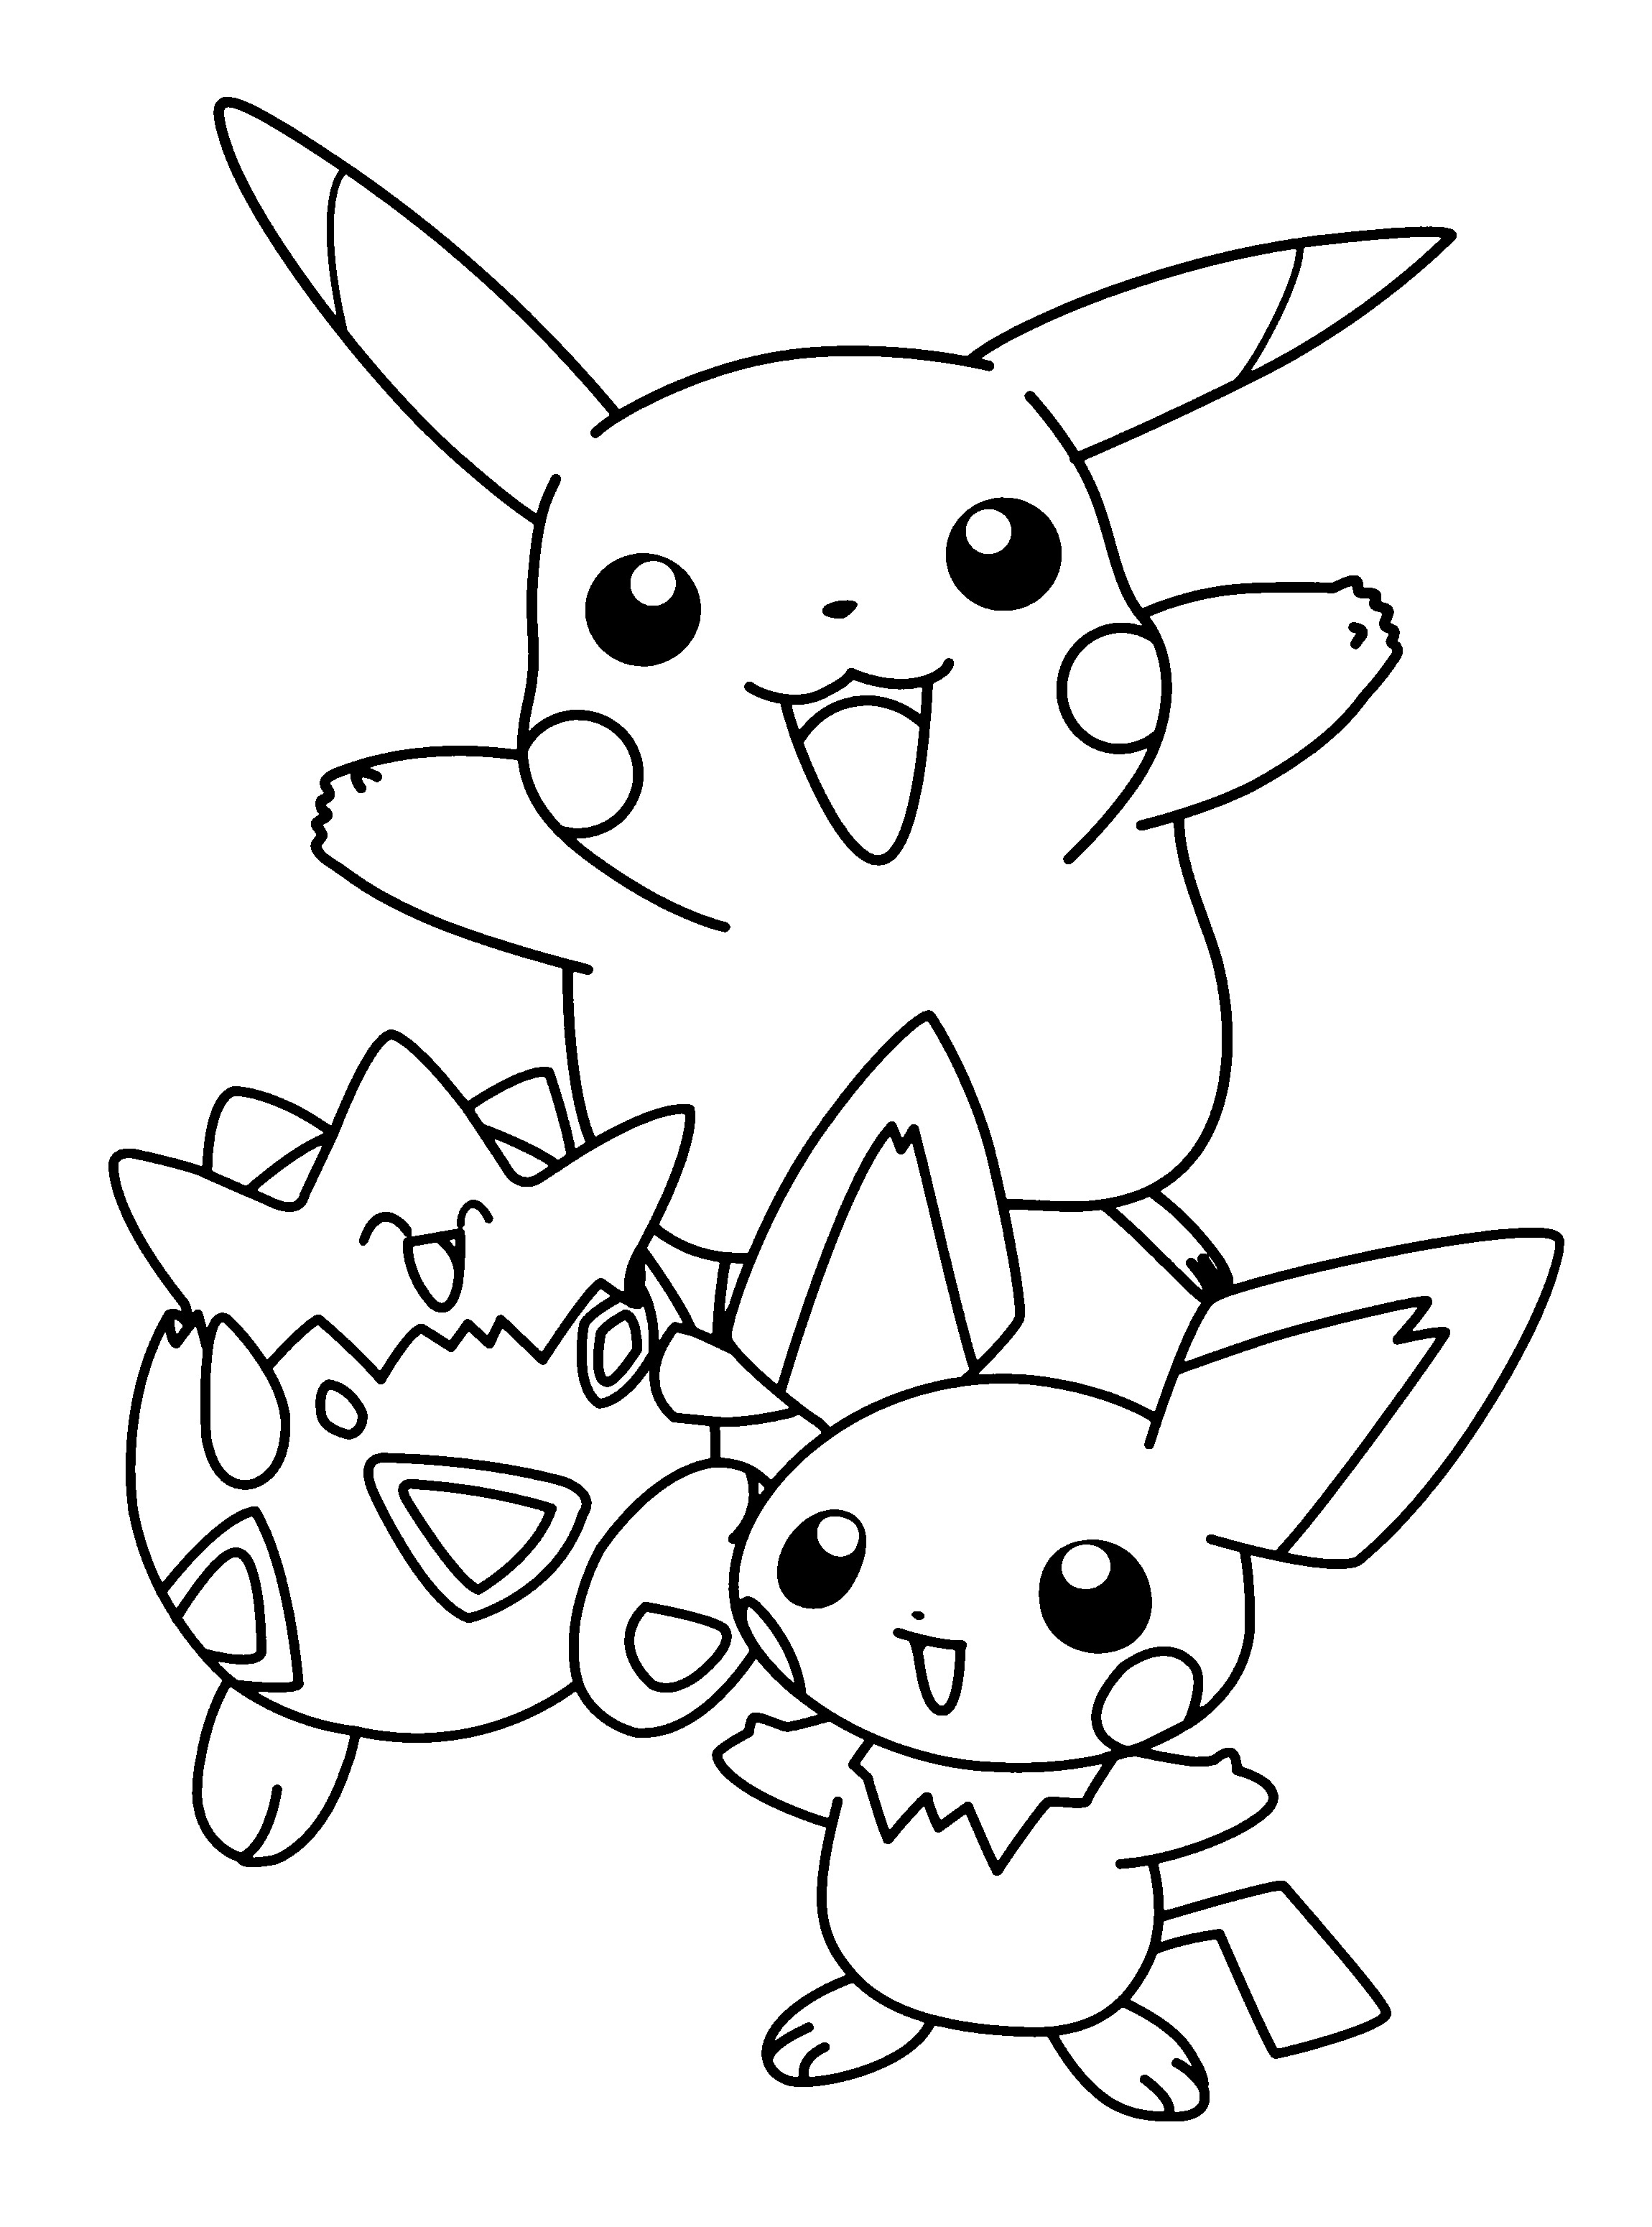 Cute Pokemon Coloring Pages Wallpaper